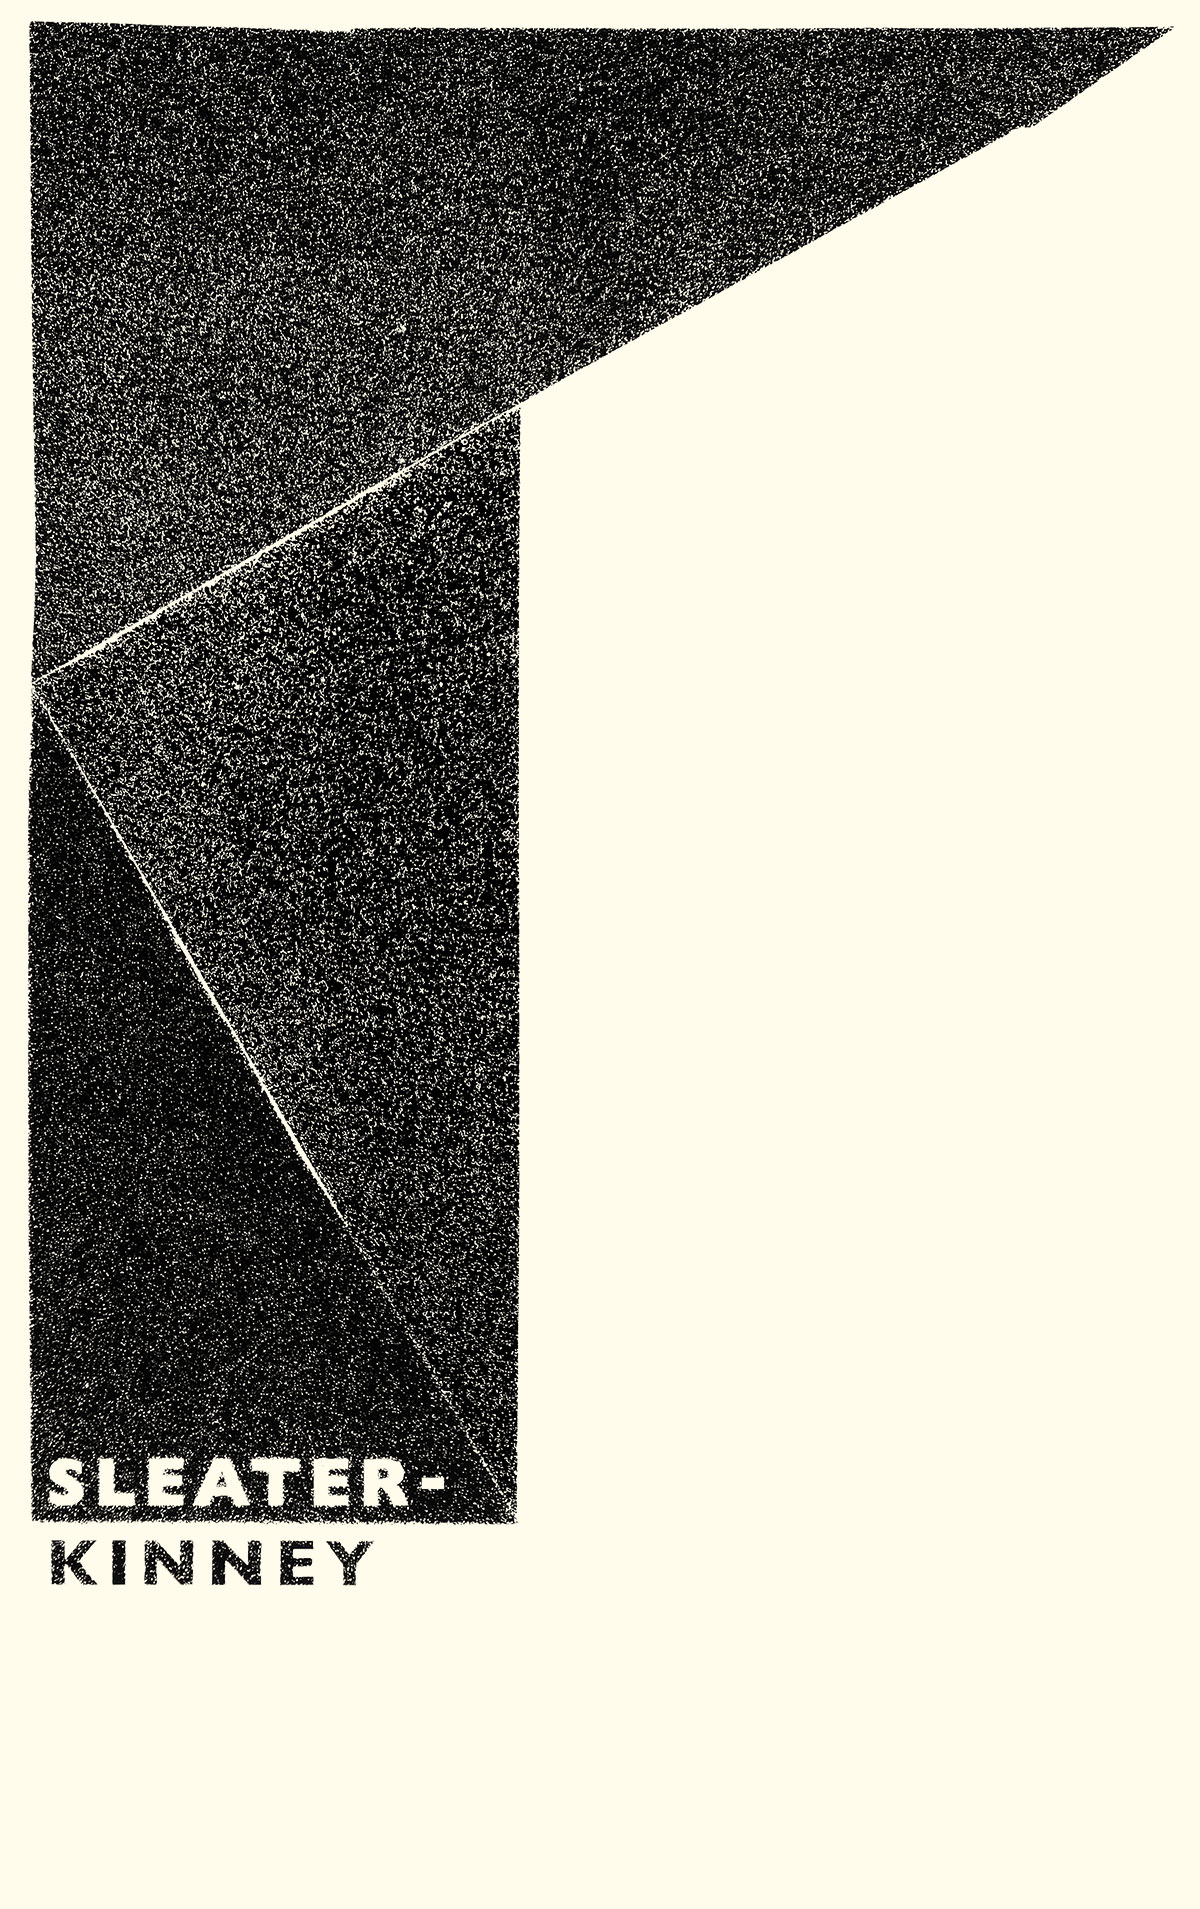 Sleater Kinney gigposter process 01 by Rainbow Posters